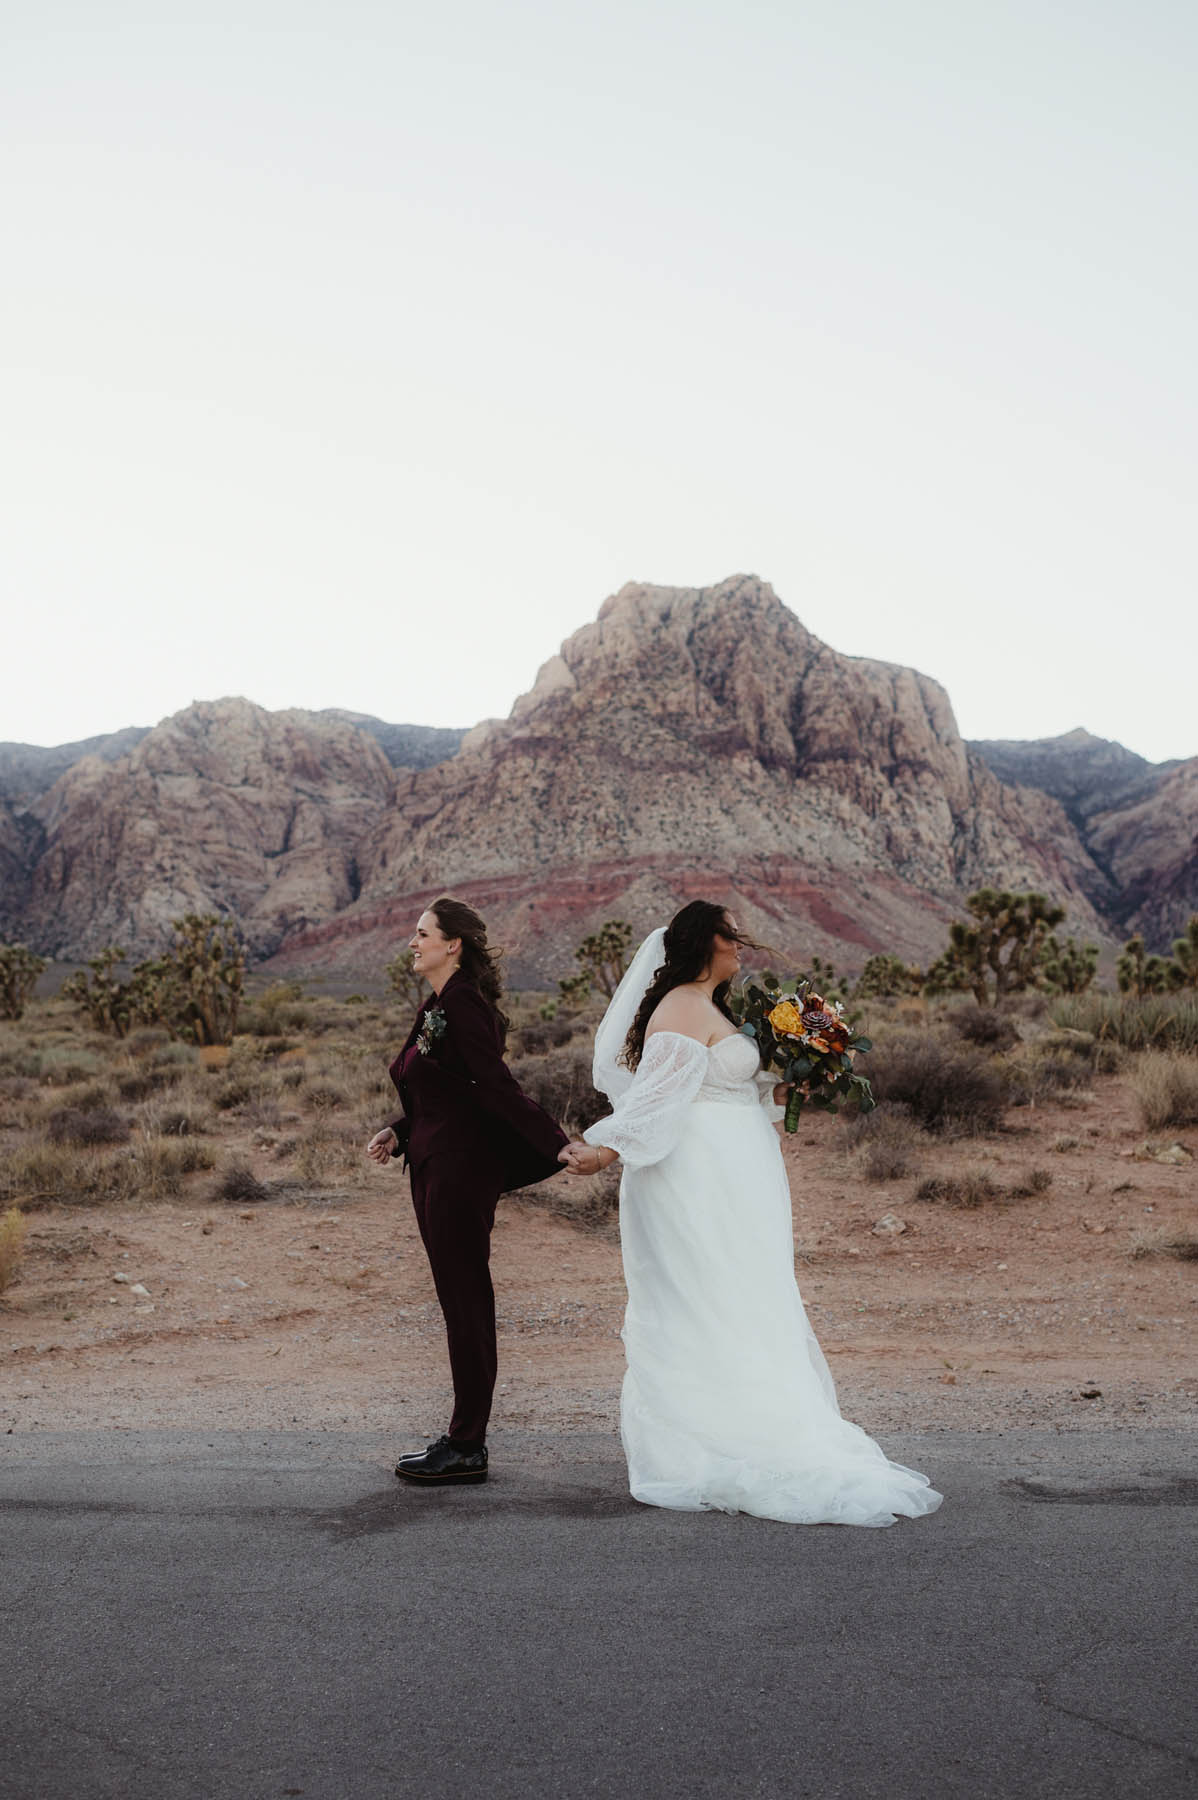 Two whie brunettes hold hands and stand back to back against a rocky desert background.